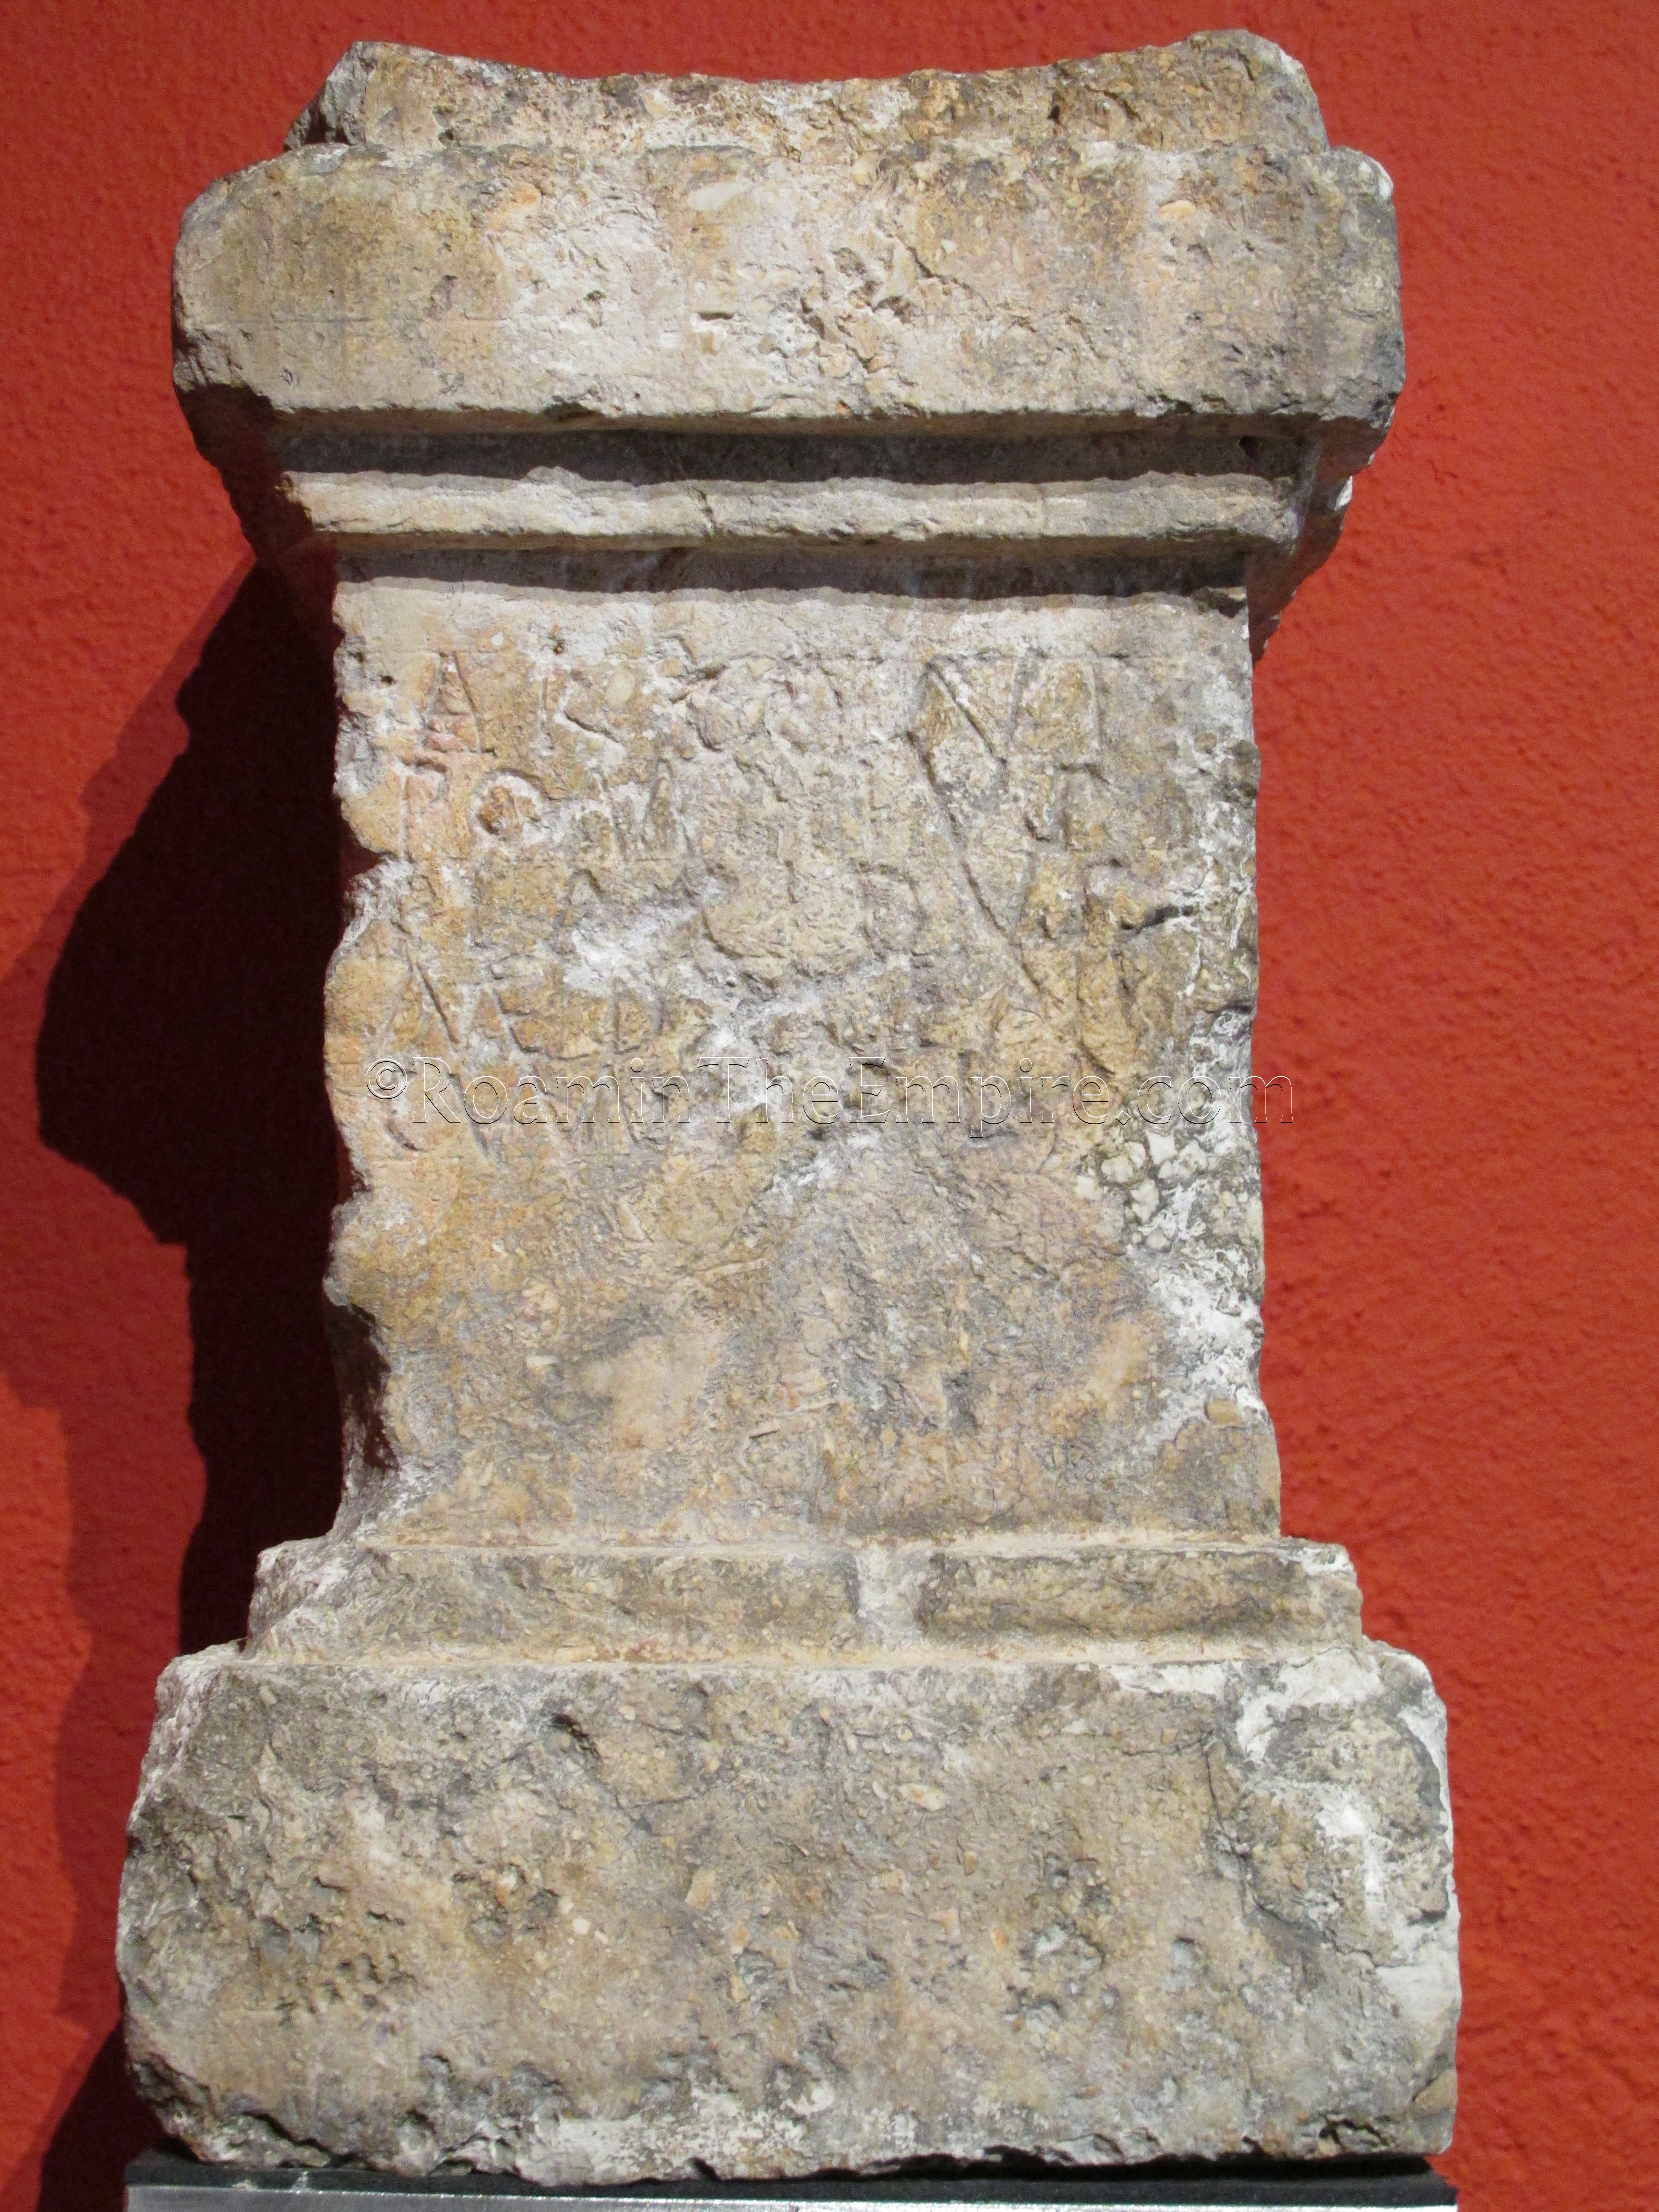 Altar dedicated to Arco by Pompeius Placidus Meducenicum, dated to the 1st century CE.